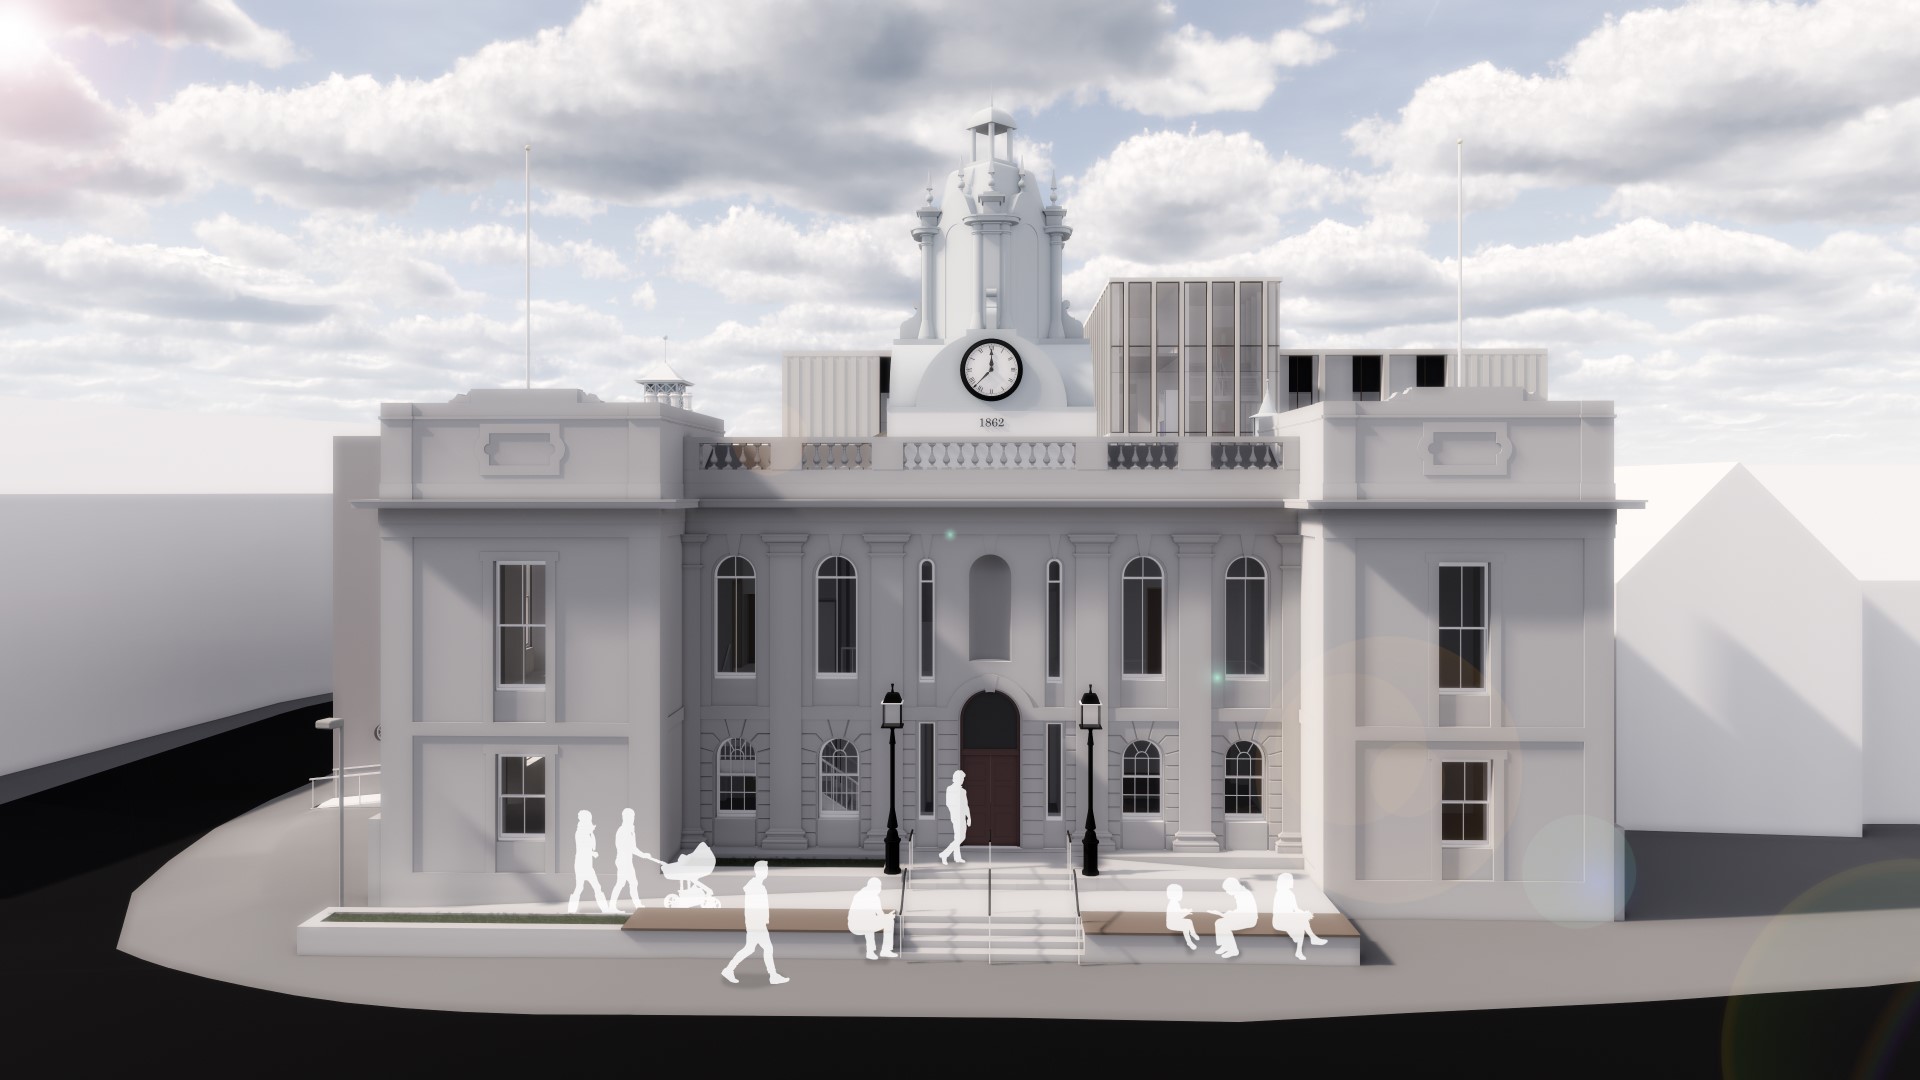 Inverurie Town Hall revamp and extension plans submitted